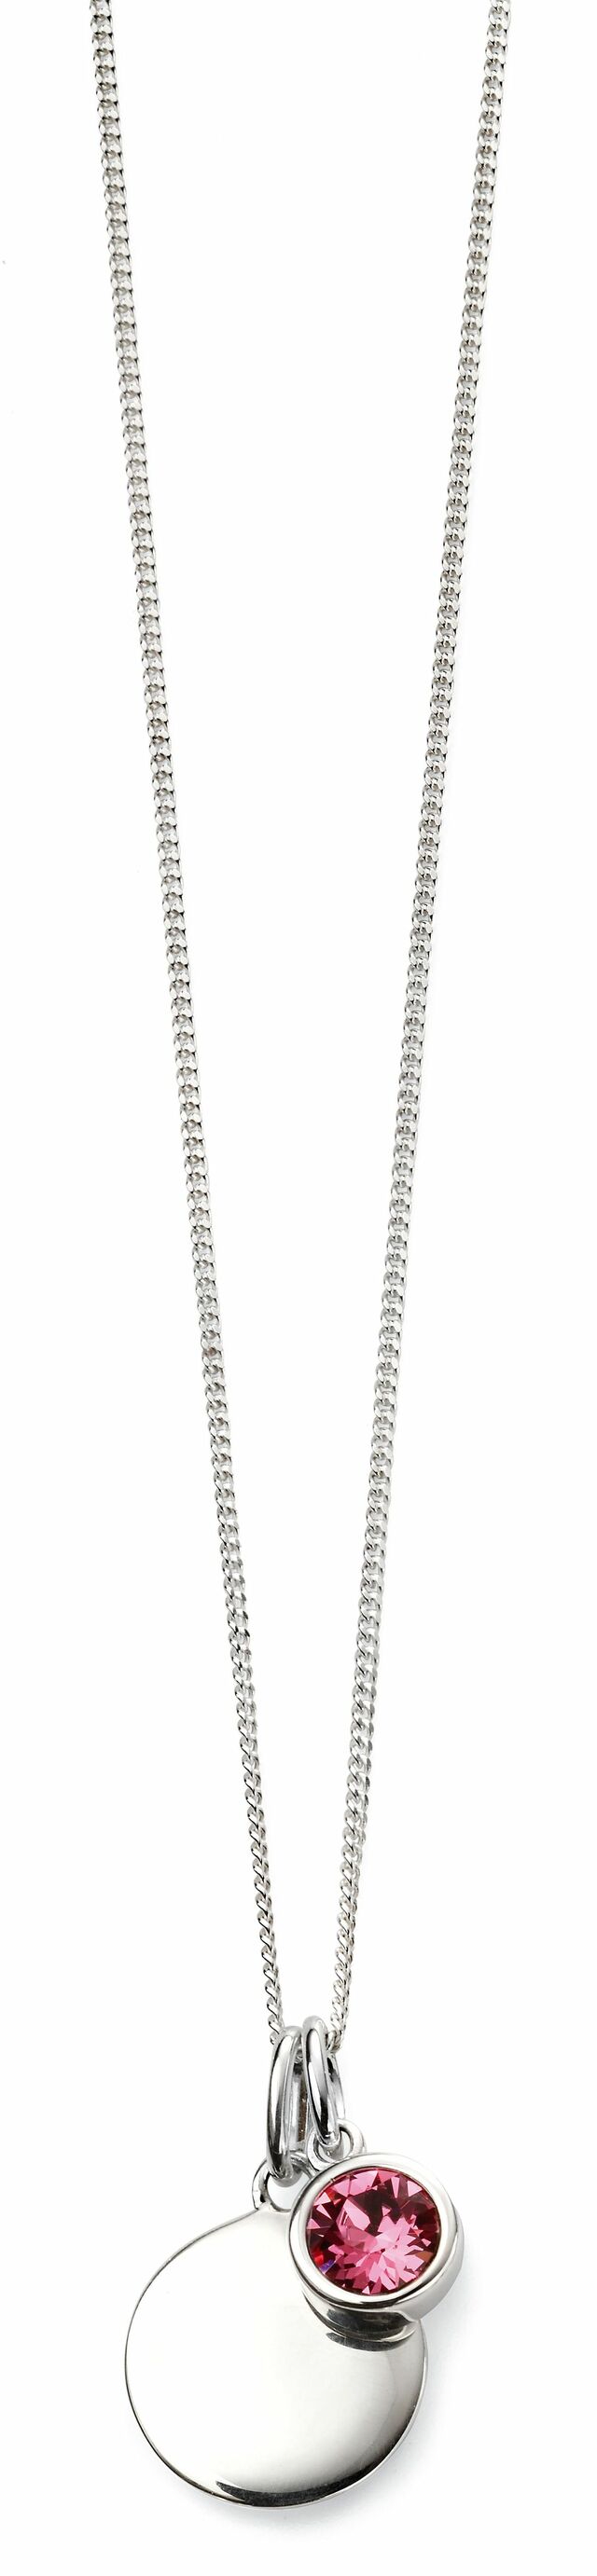 October Silver and Crystal Birthstone Necklace - NB1010 - Hallmark Jewellers Formby & The Jewellers Bench Widnes